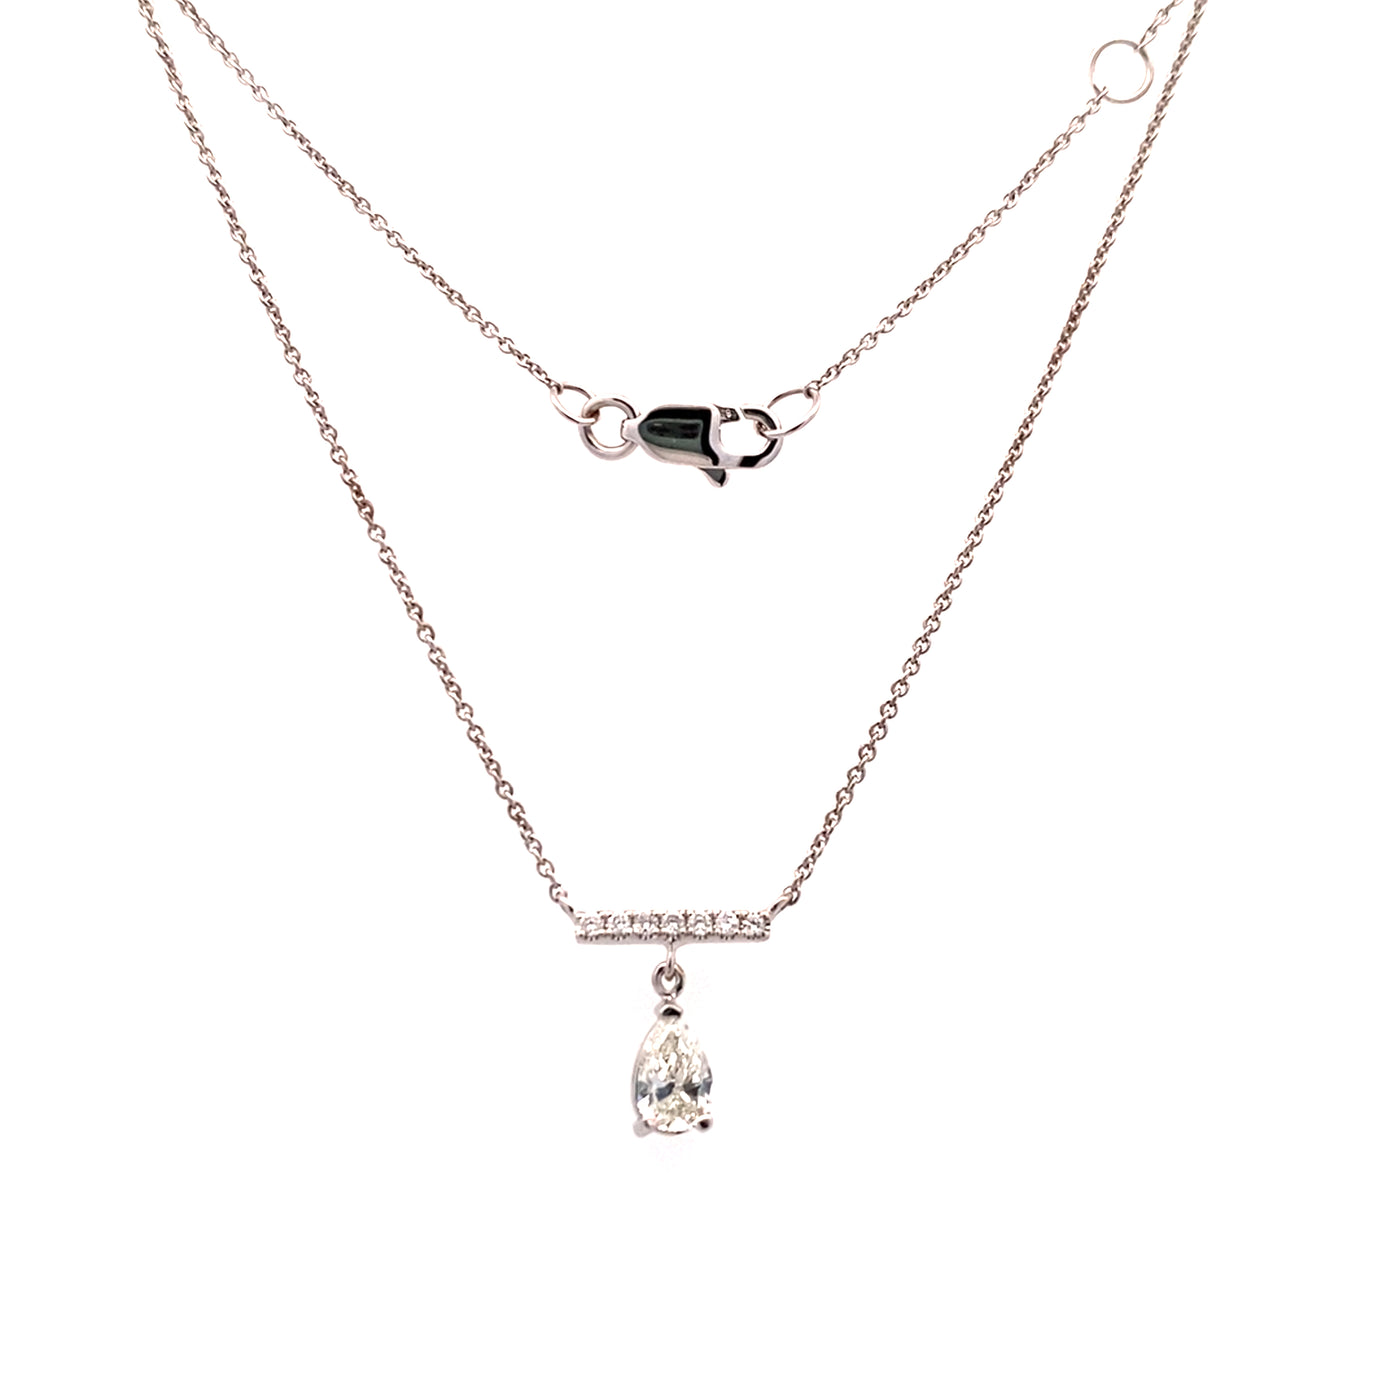 Beeghly & Co. 14 Karat Bar necklace with Drop Pear Diamond QPTNQ7231